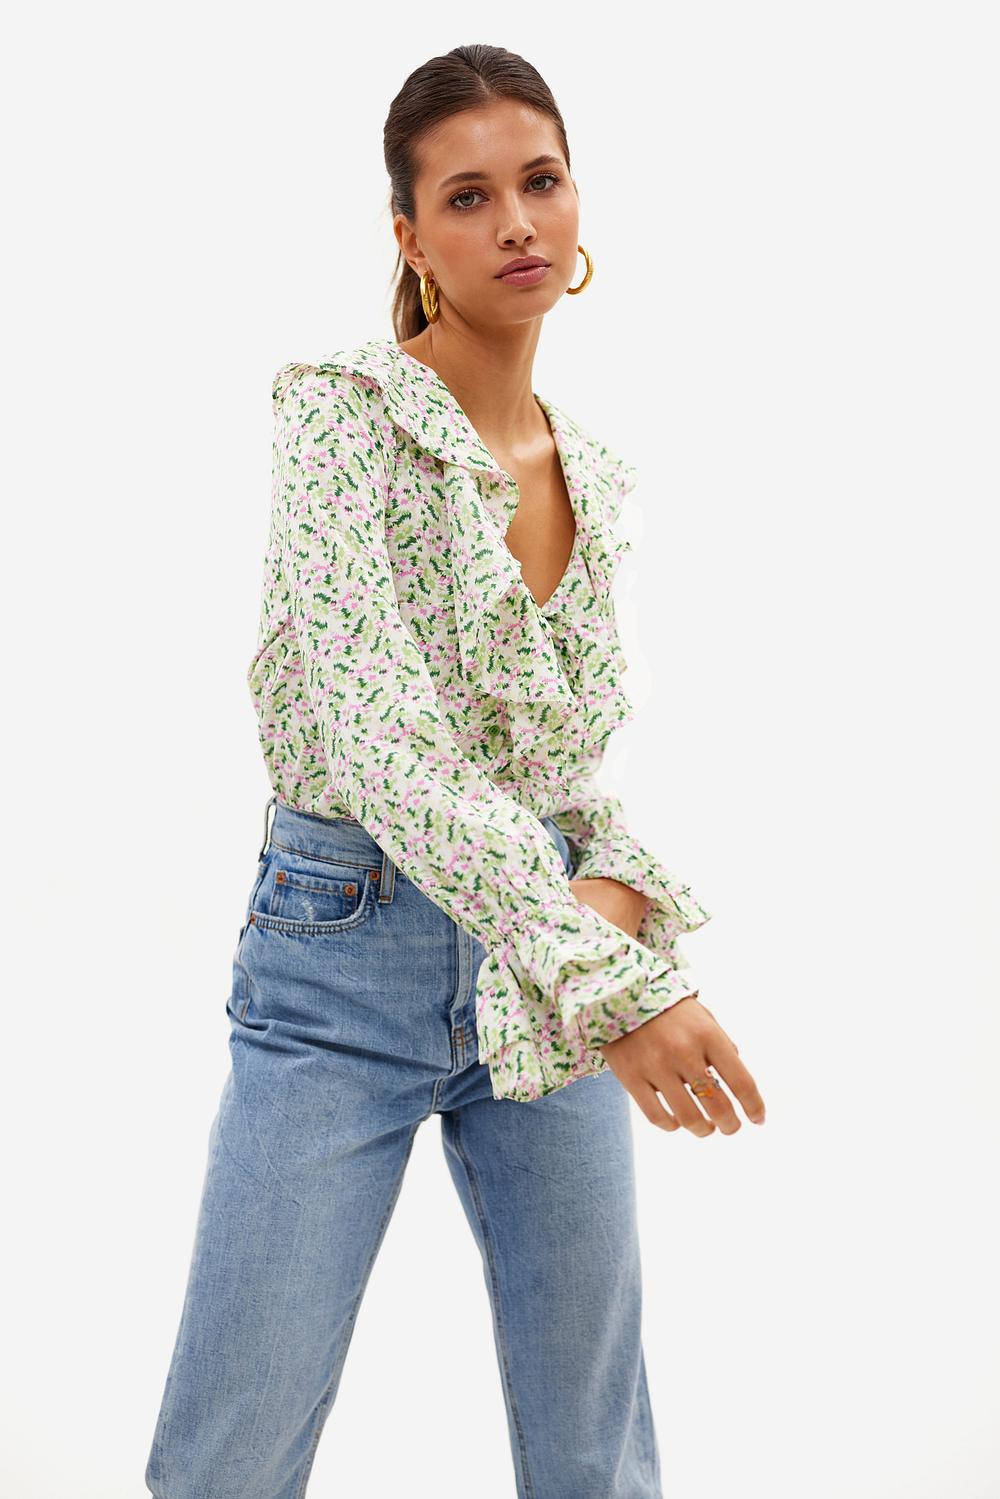 Green blouse with floral print